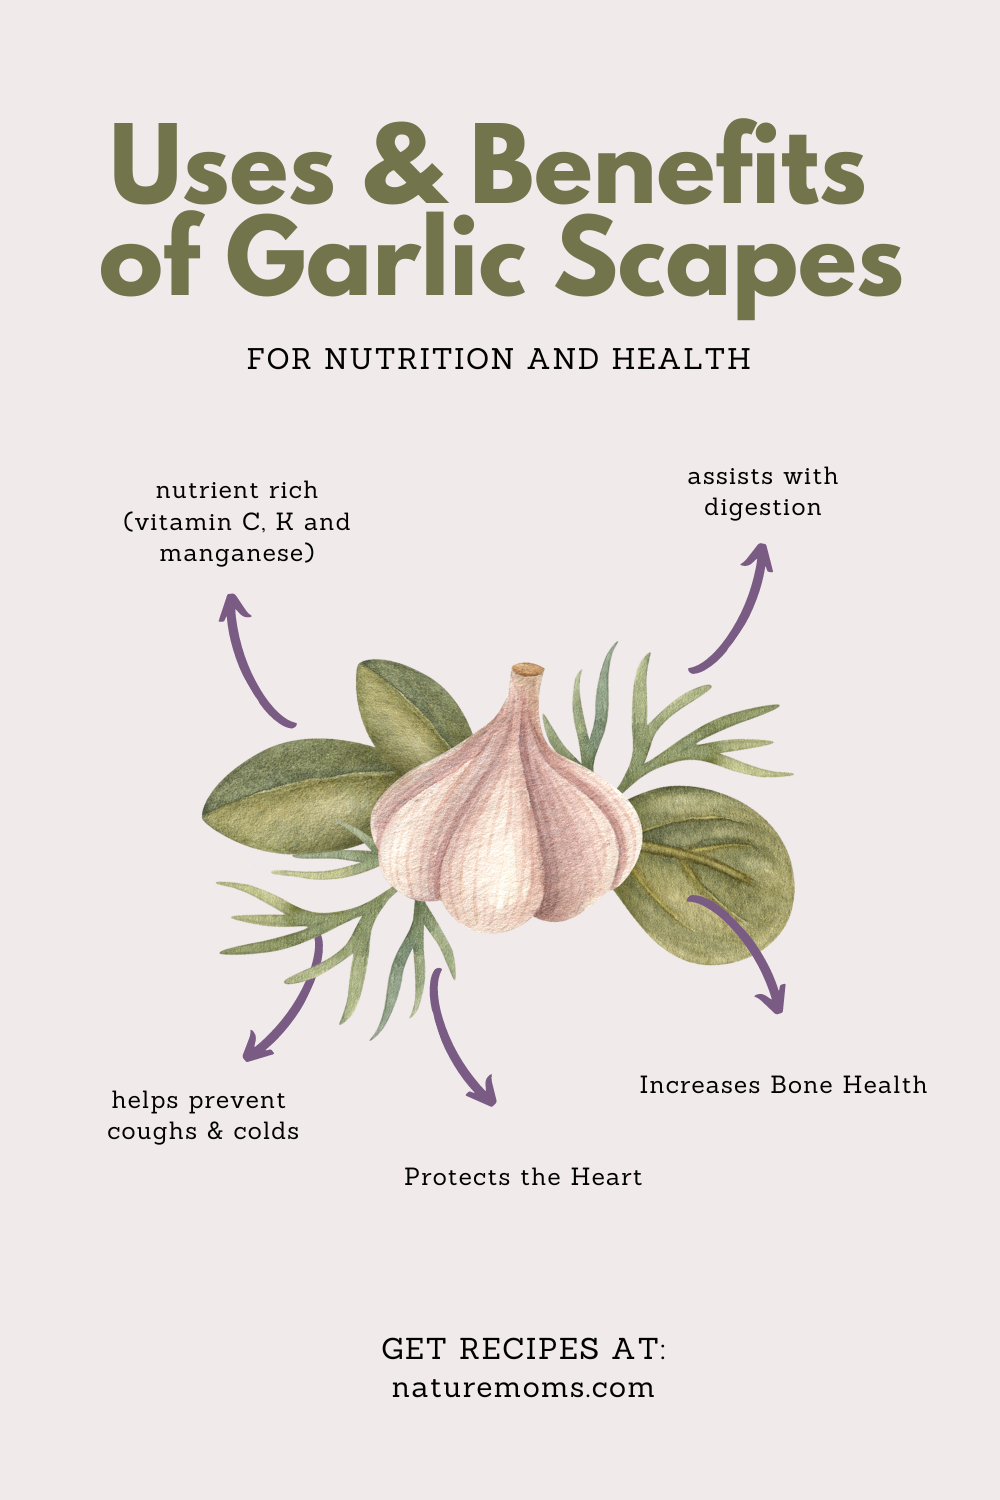 Uses and benefits of garlic scapes